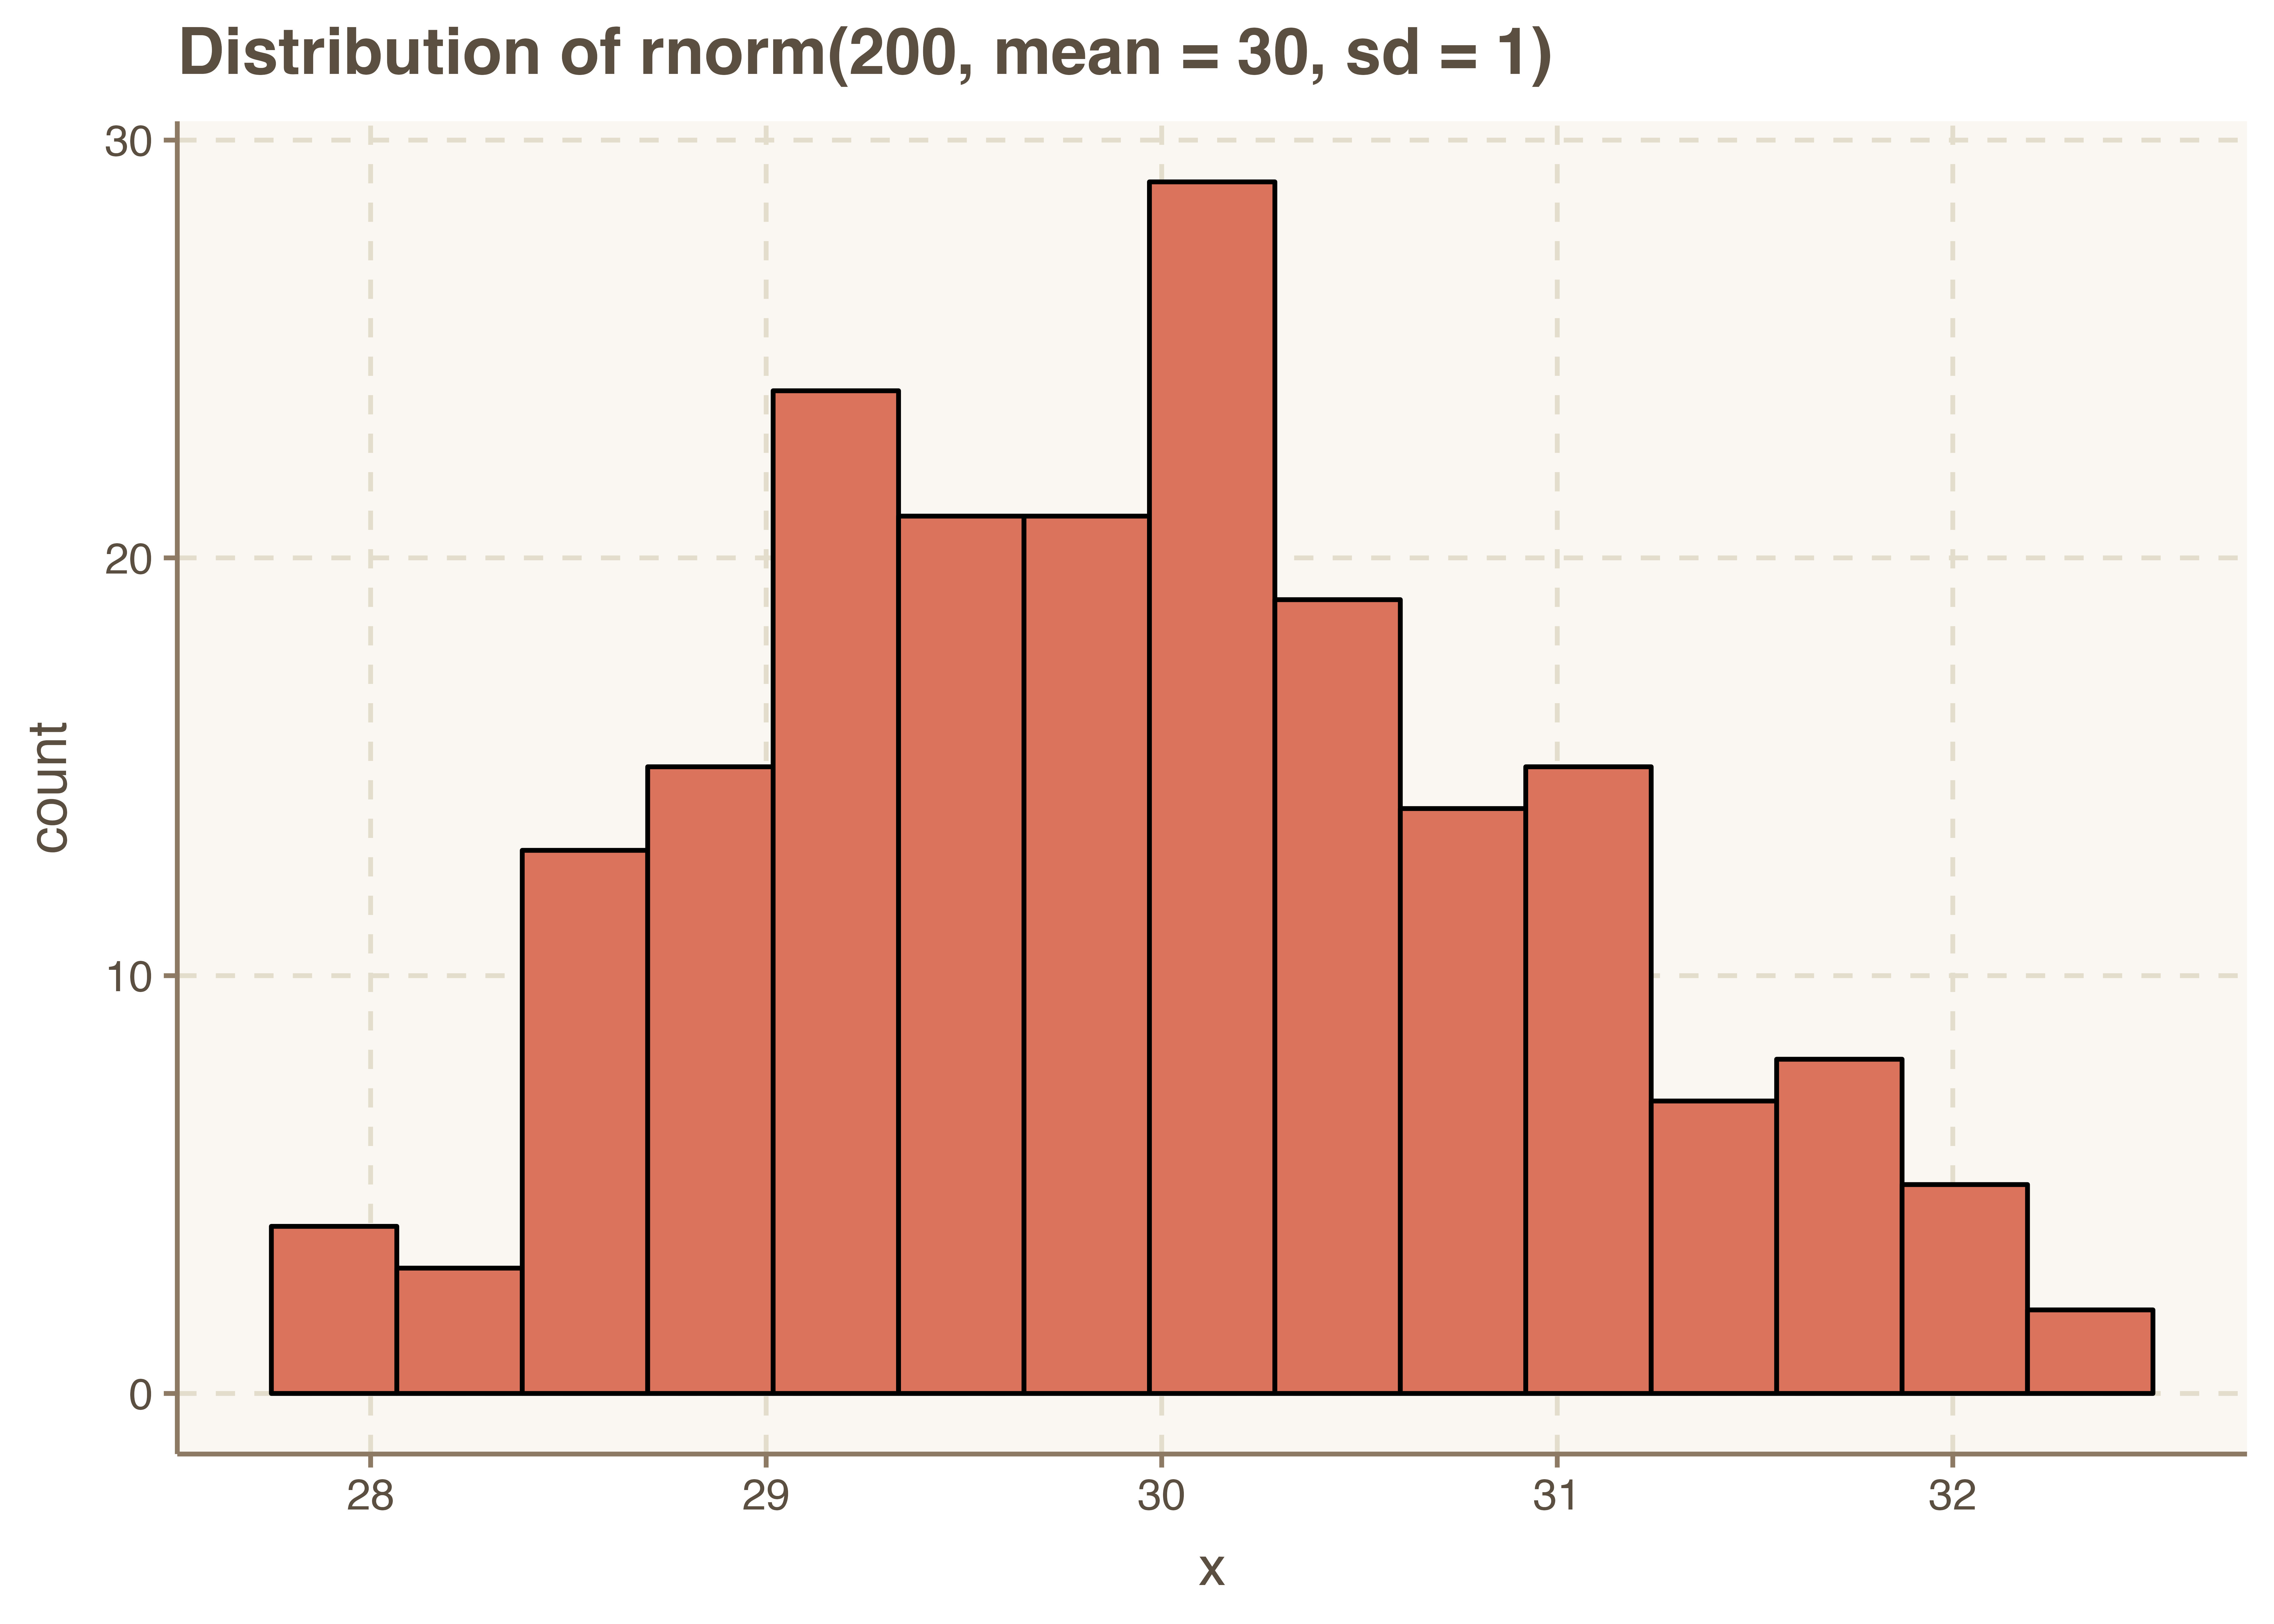 Implementation of Histogram with ggplot2